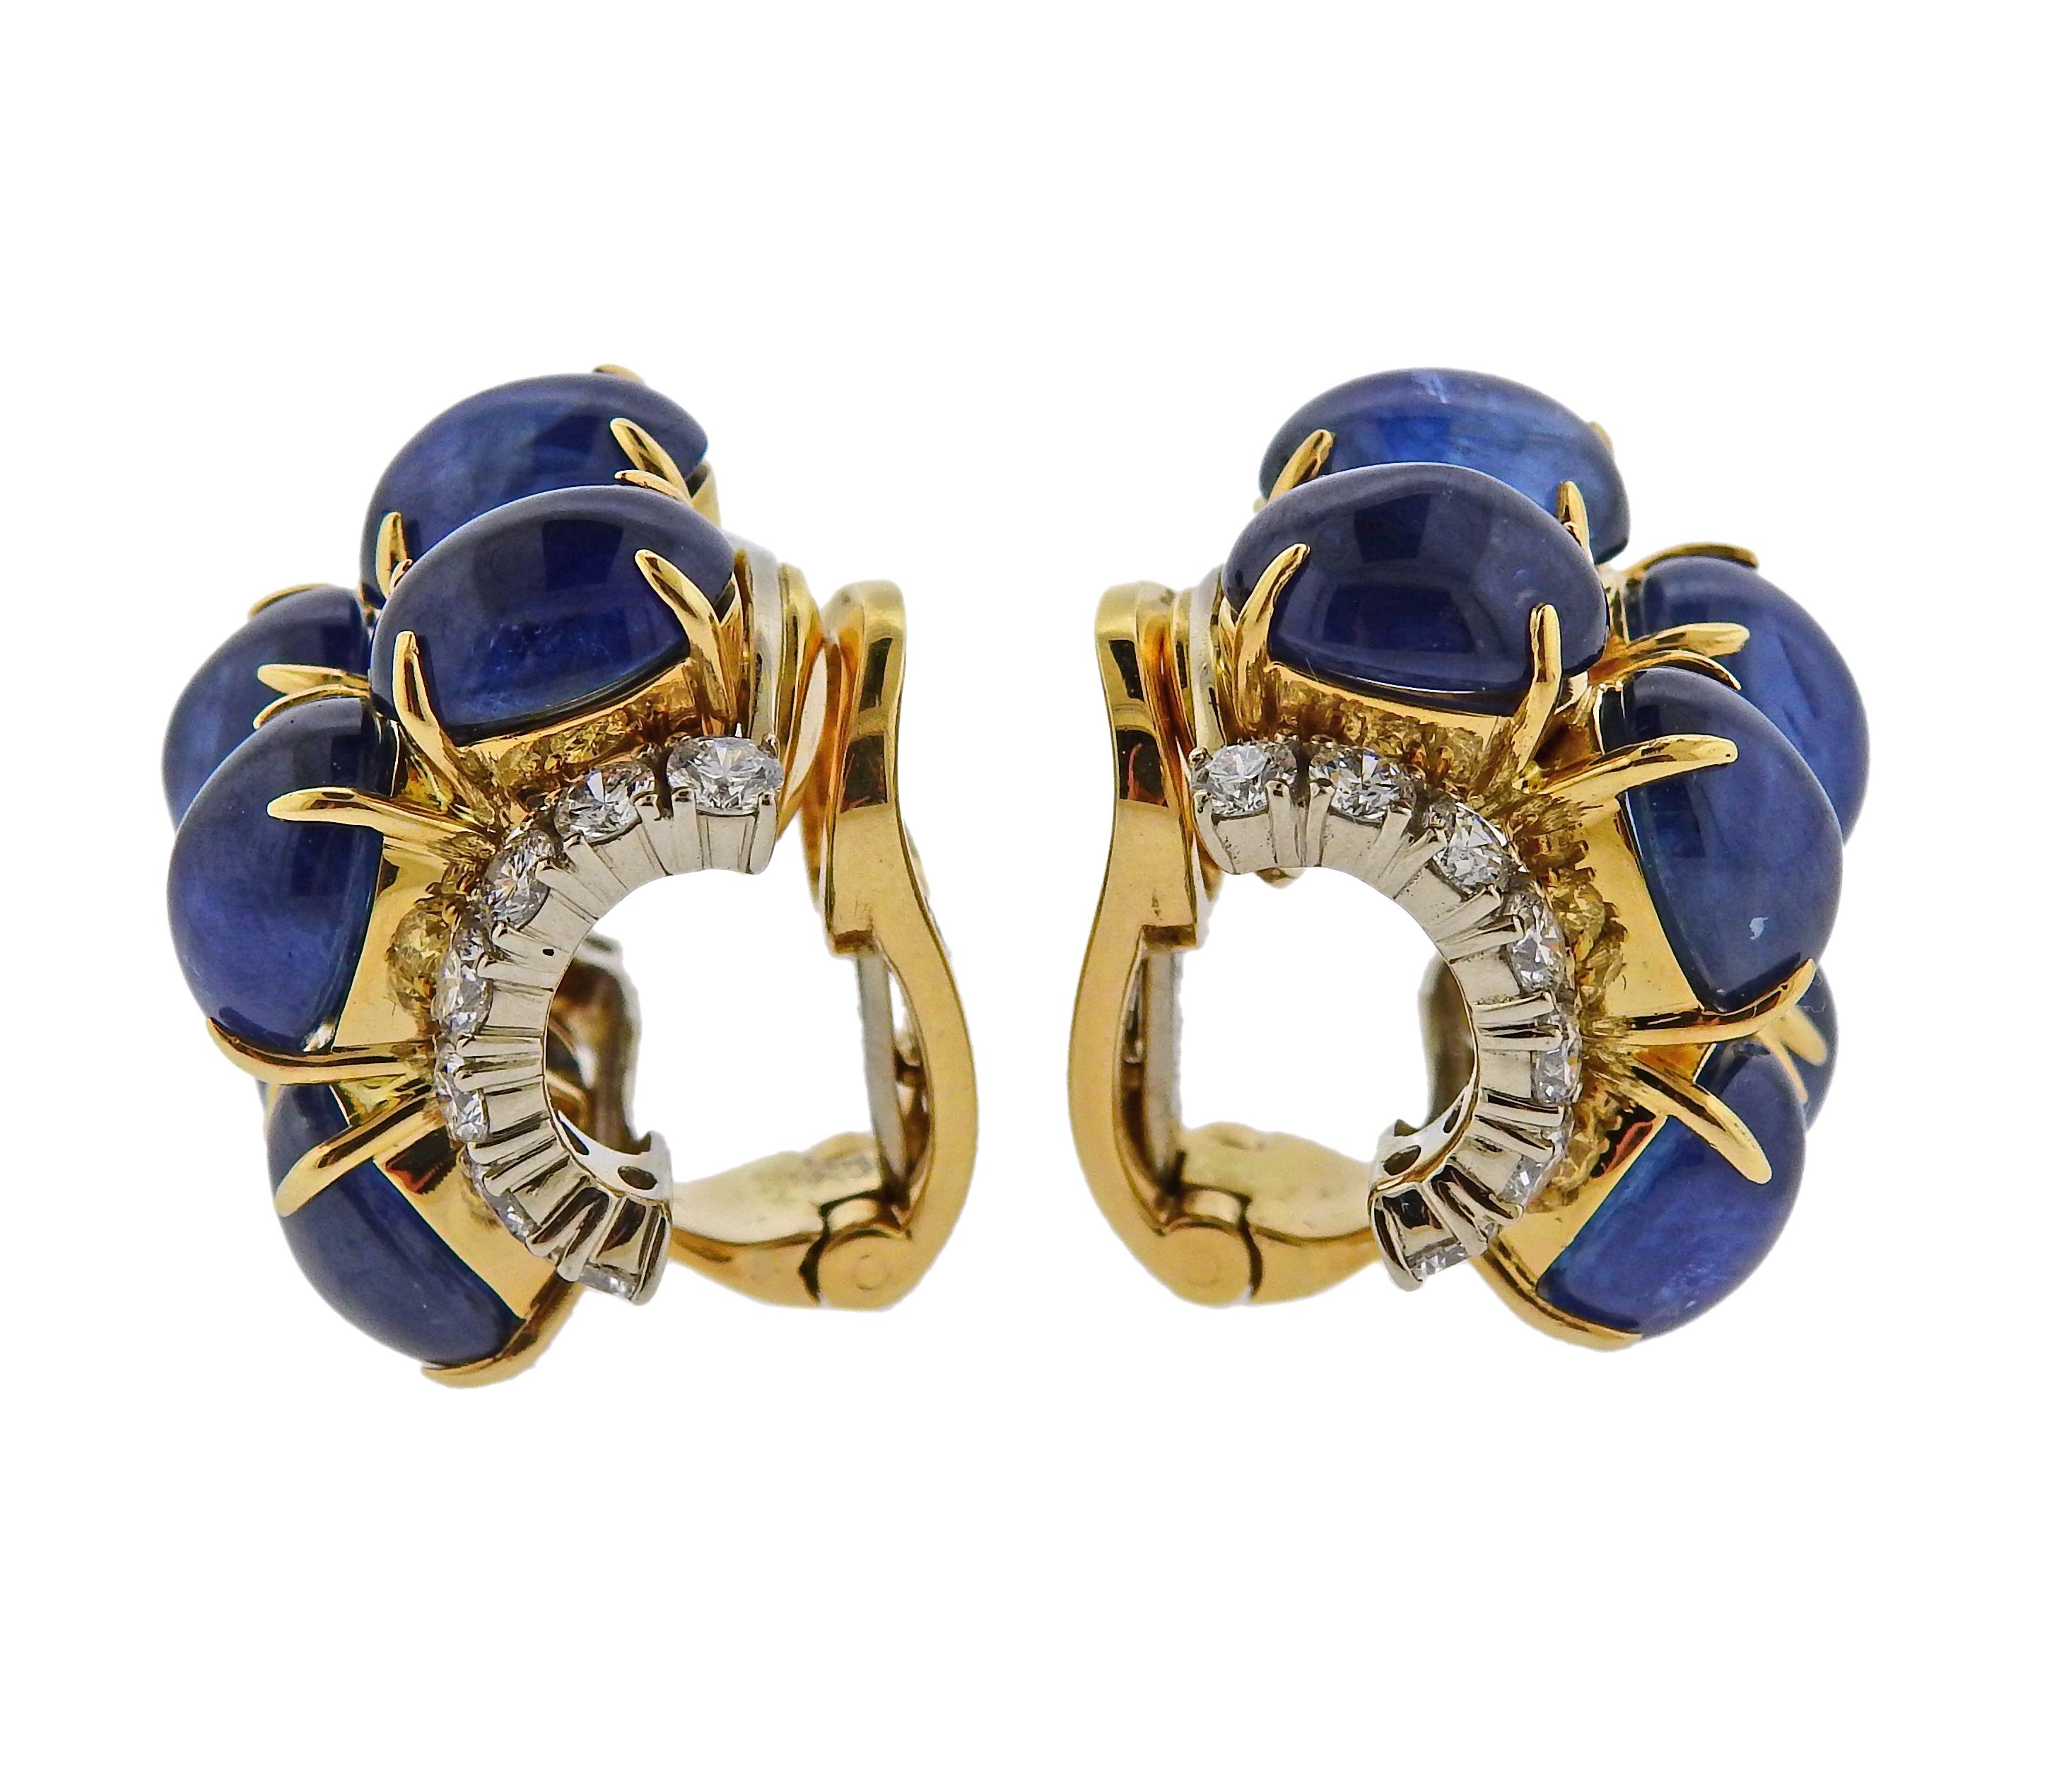 Exquisite pair of 18k yellow gold earrings by Aletto Brothers, featuring 12 oval sapphire cabochons - total of 37 carats, and 2.00ctw in diamonds. The earrings measure 25mm x 18mm. Marked  USA, Ct.2.00, Aletto Bros, S 37.00, 750. Weigh 31.7 grams.
 